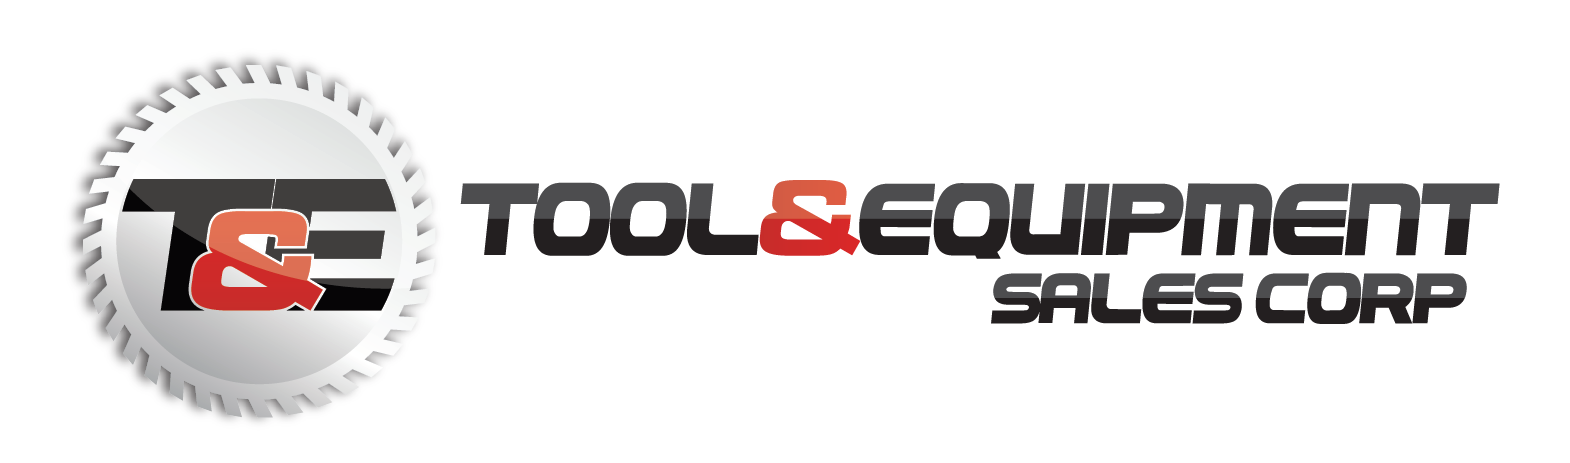 Tool and Equipment Sales Corp